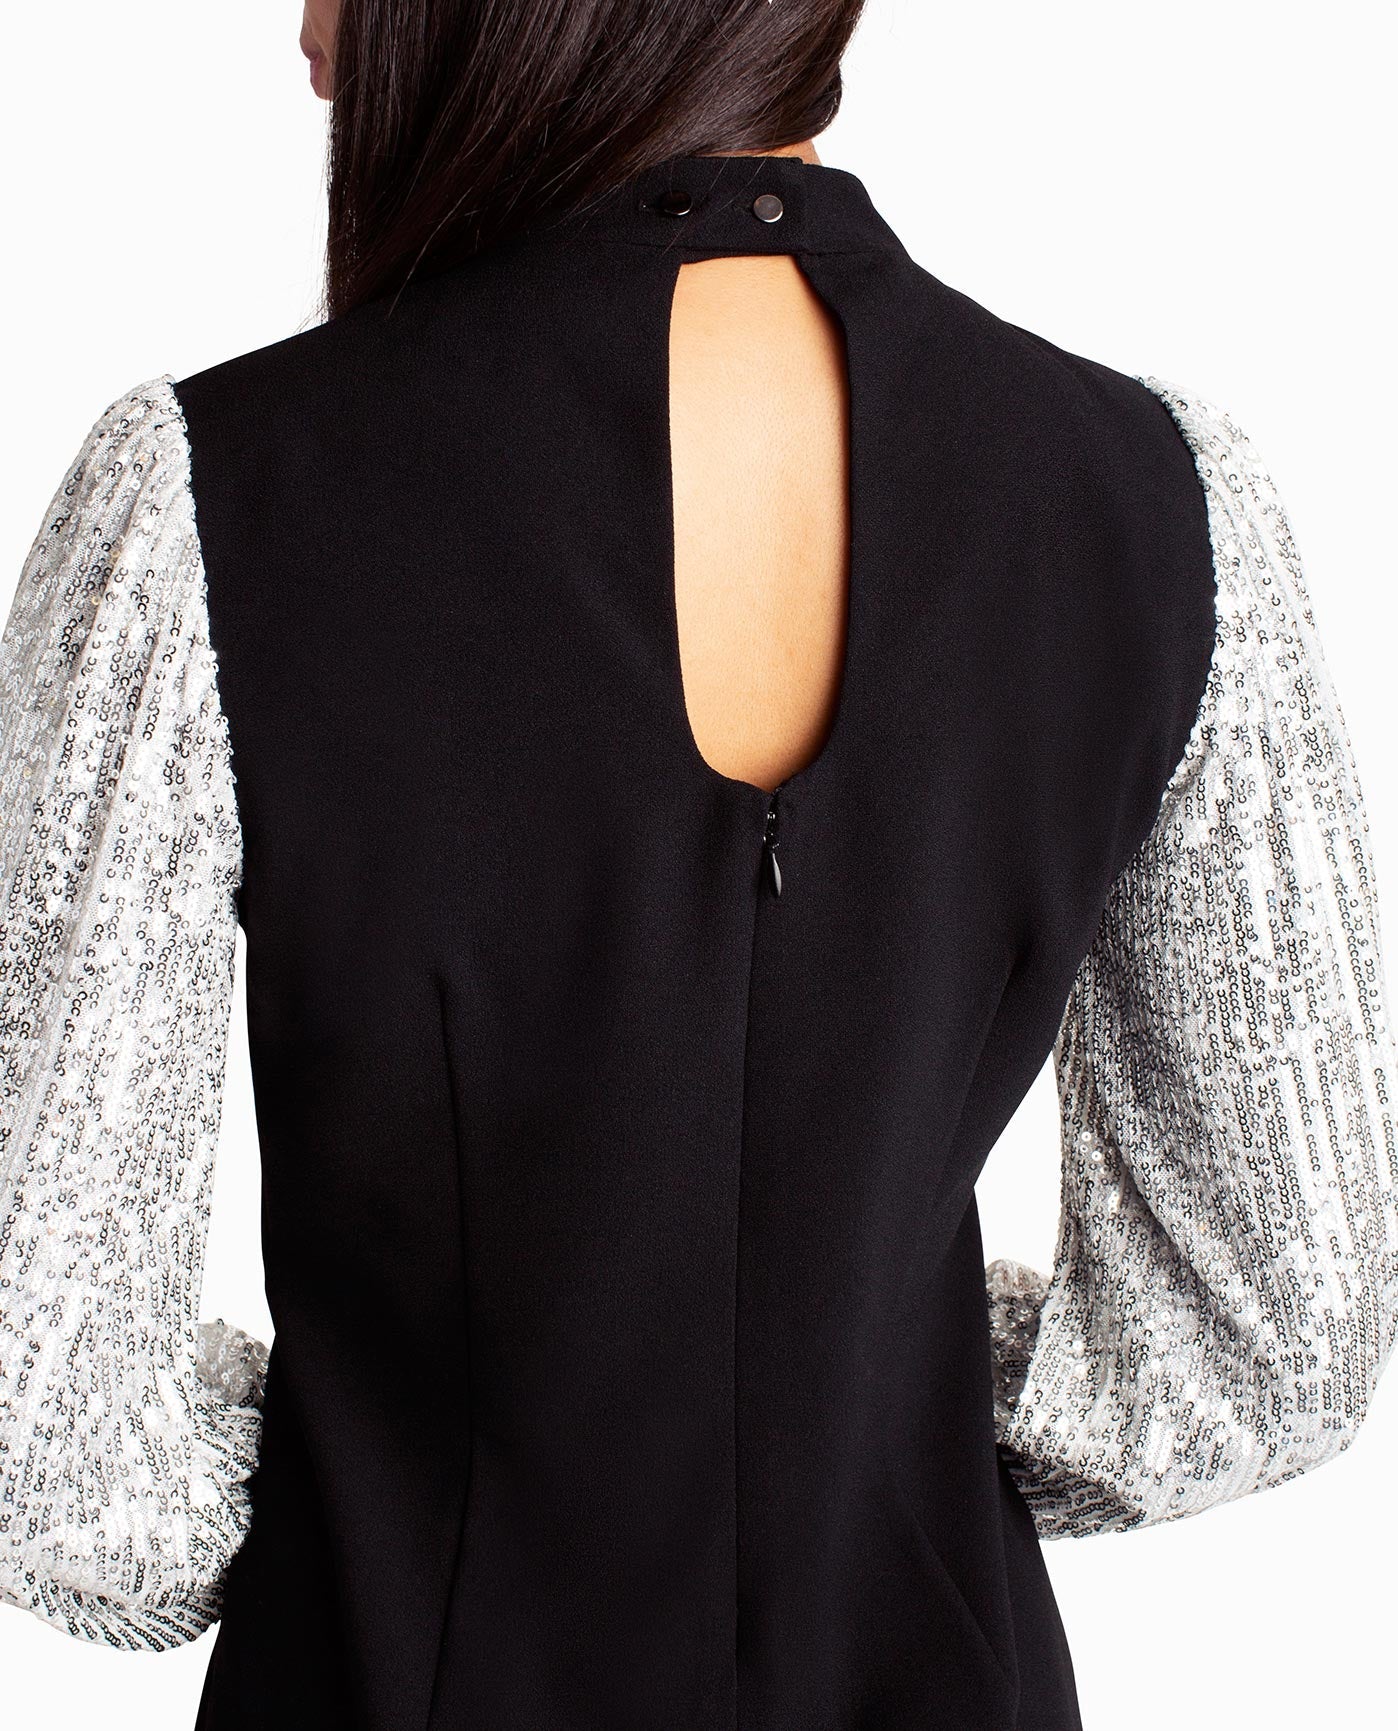 KEYHOLE BACK DESIGN WITH ZIPPER CLOSURE AND BUTTON | Very Black And Silver Sequins